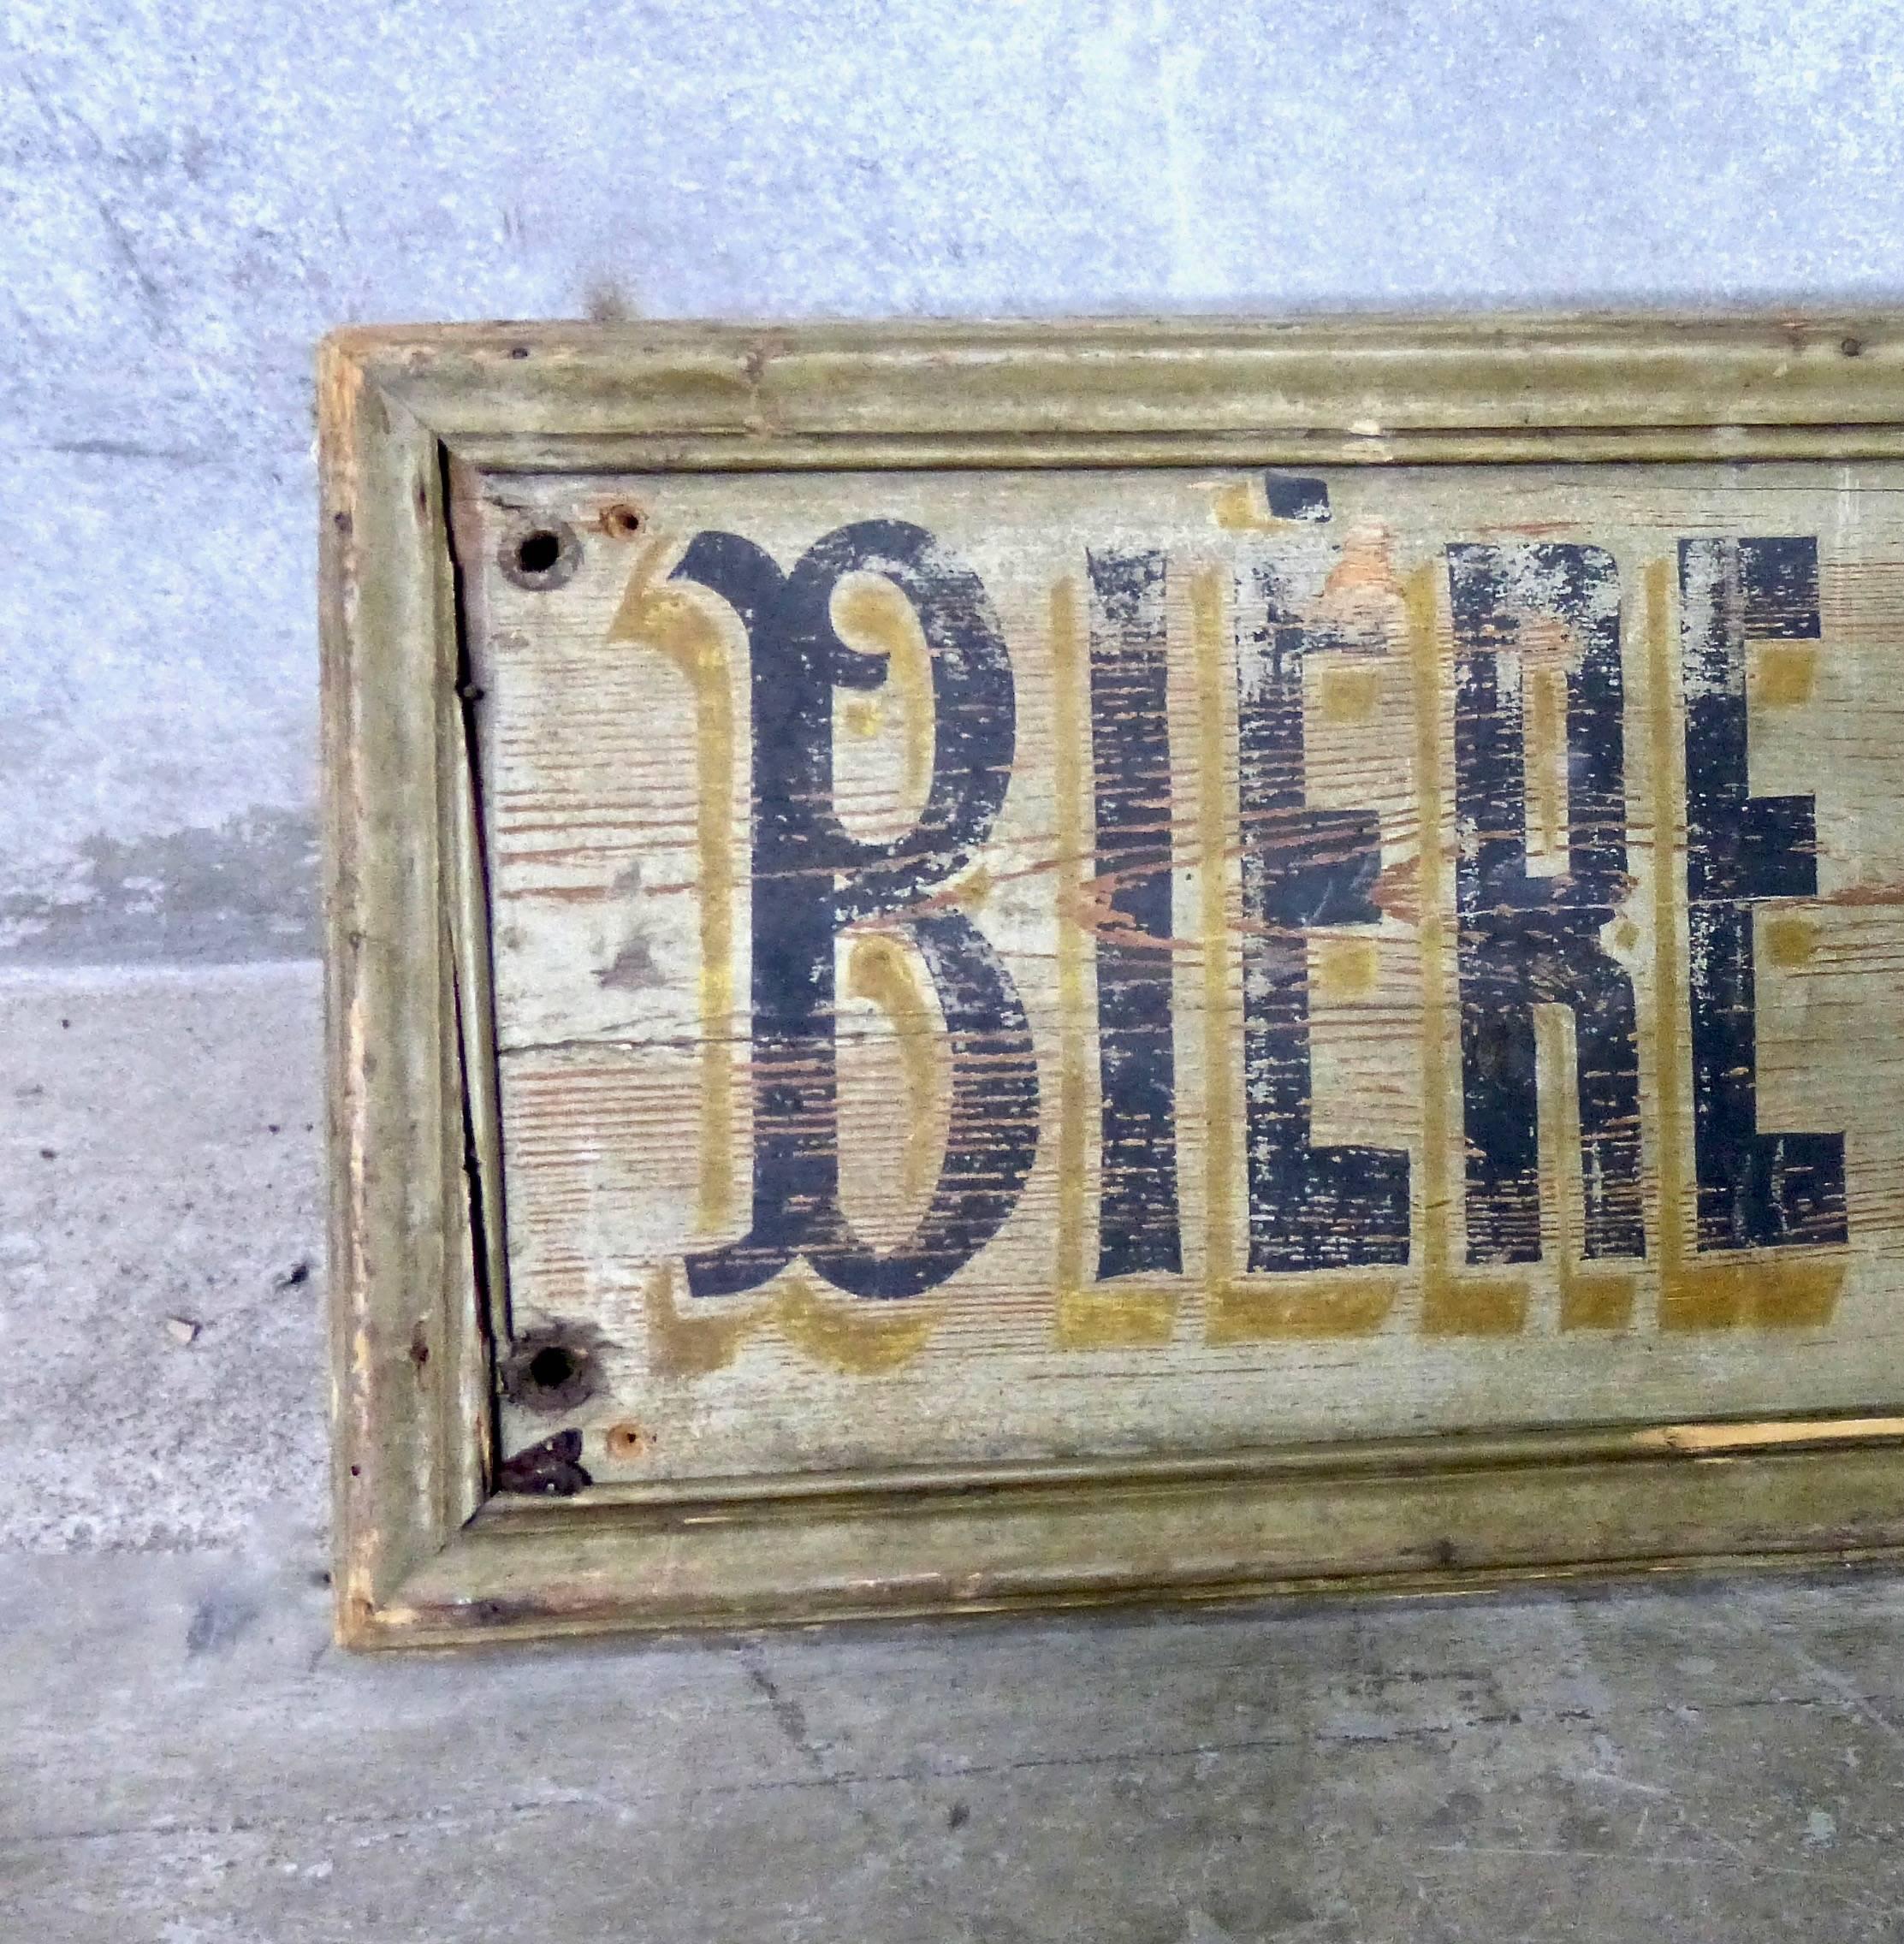 Original wooden French advertising sign depicting a produced beer in the Southern France region of Antibes known as Fort-Carre.
Great hand painted sign in untouched surface in original condition.
Unsure if the venture was shared between Picard and